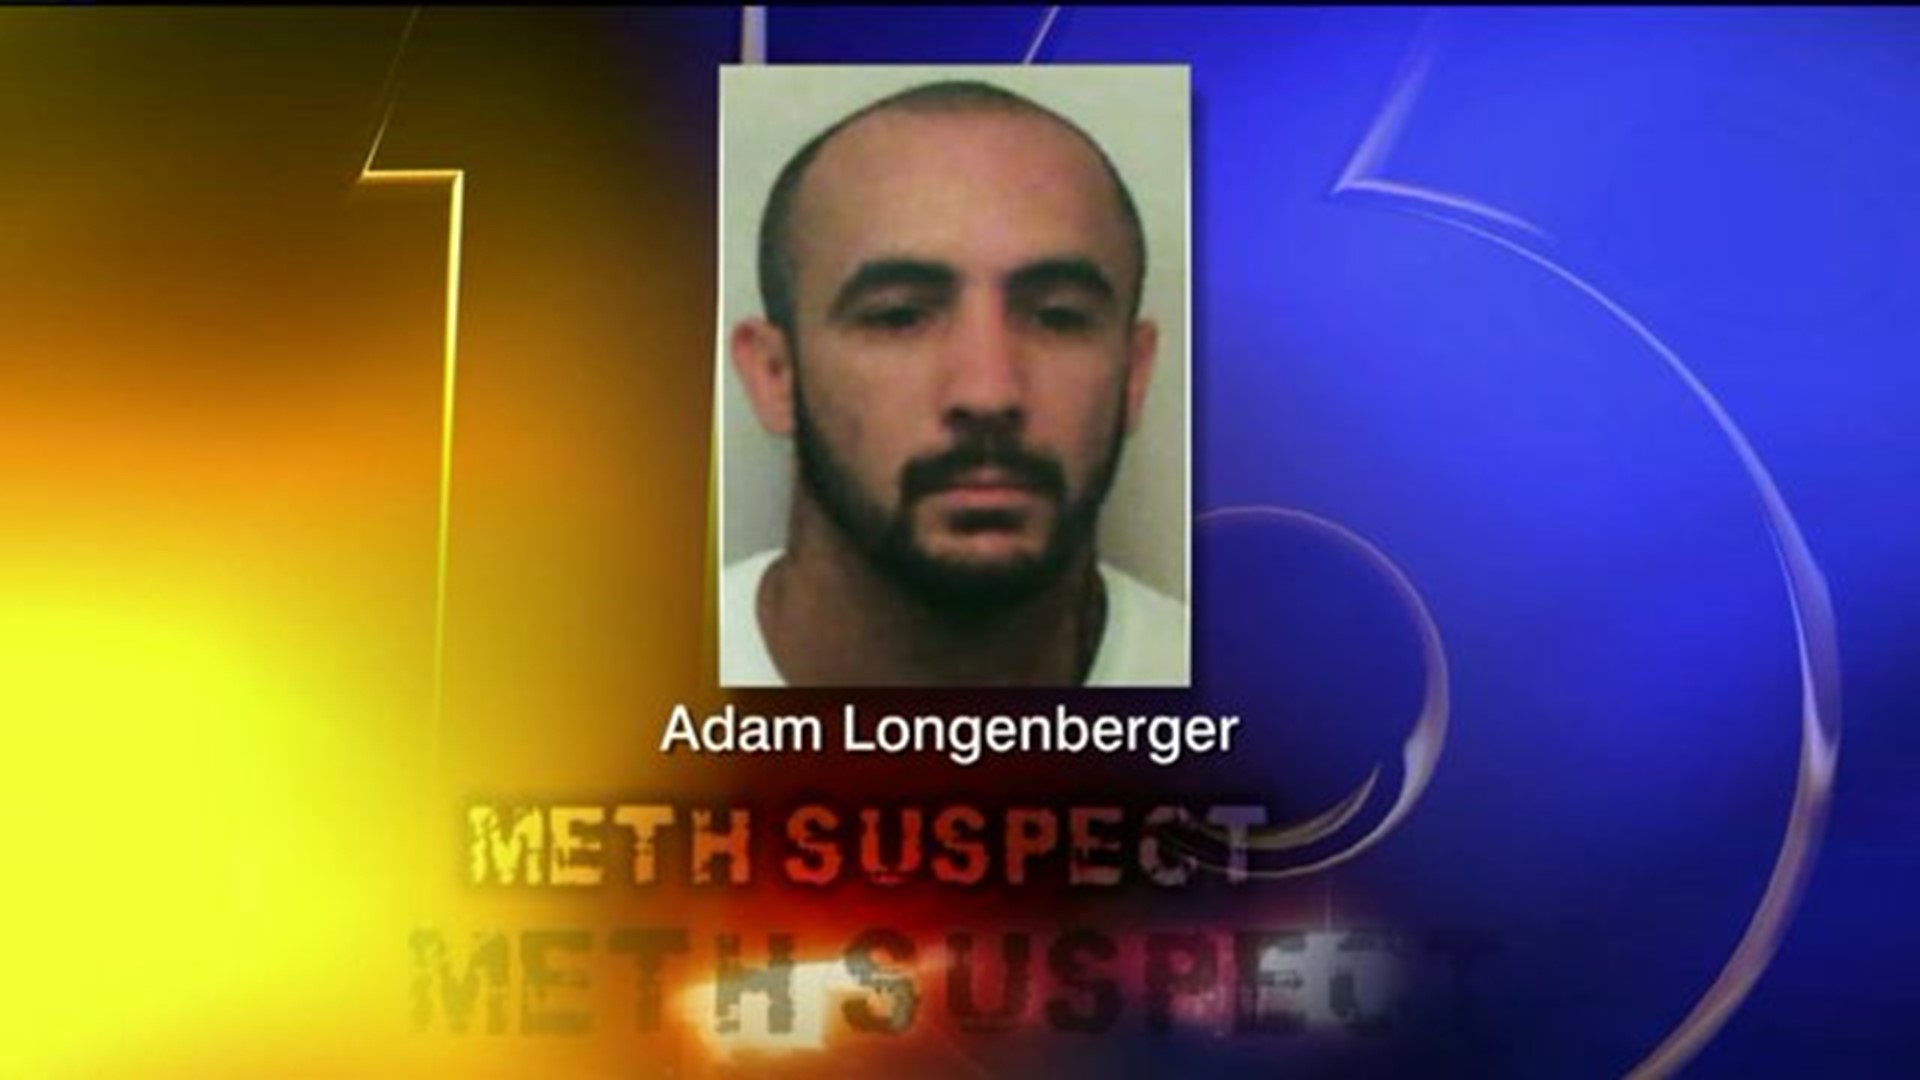 Second Suspect Caught After Meth Lab Explosion